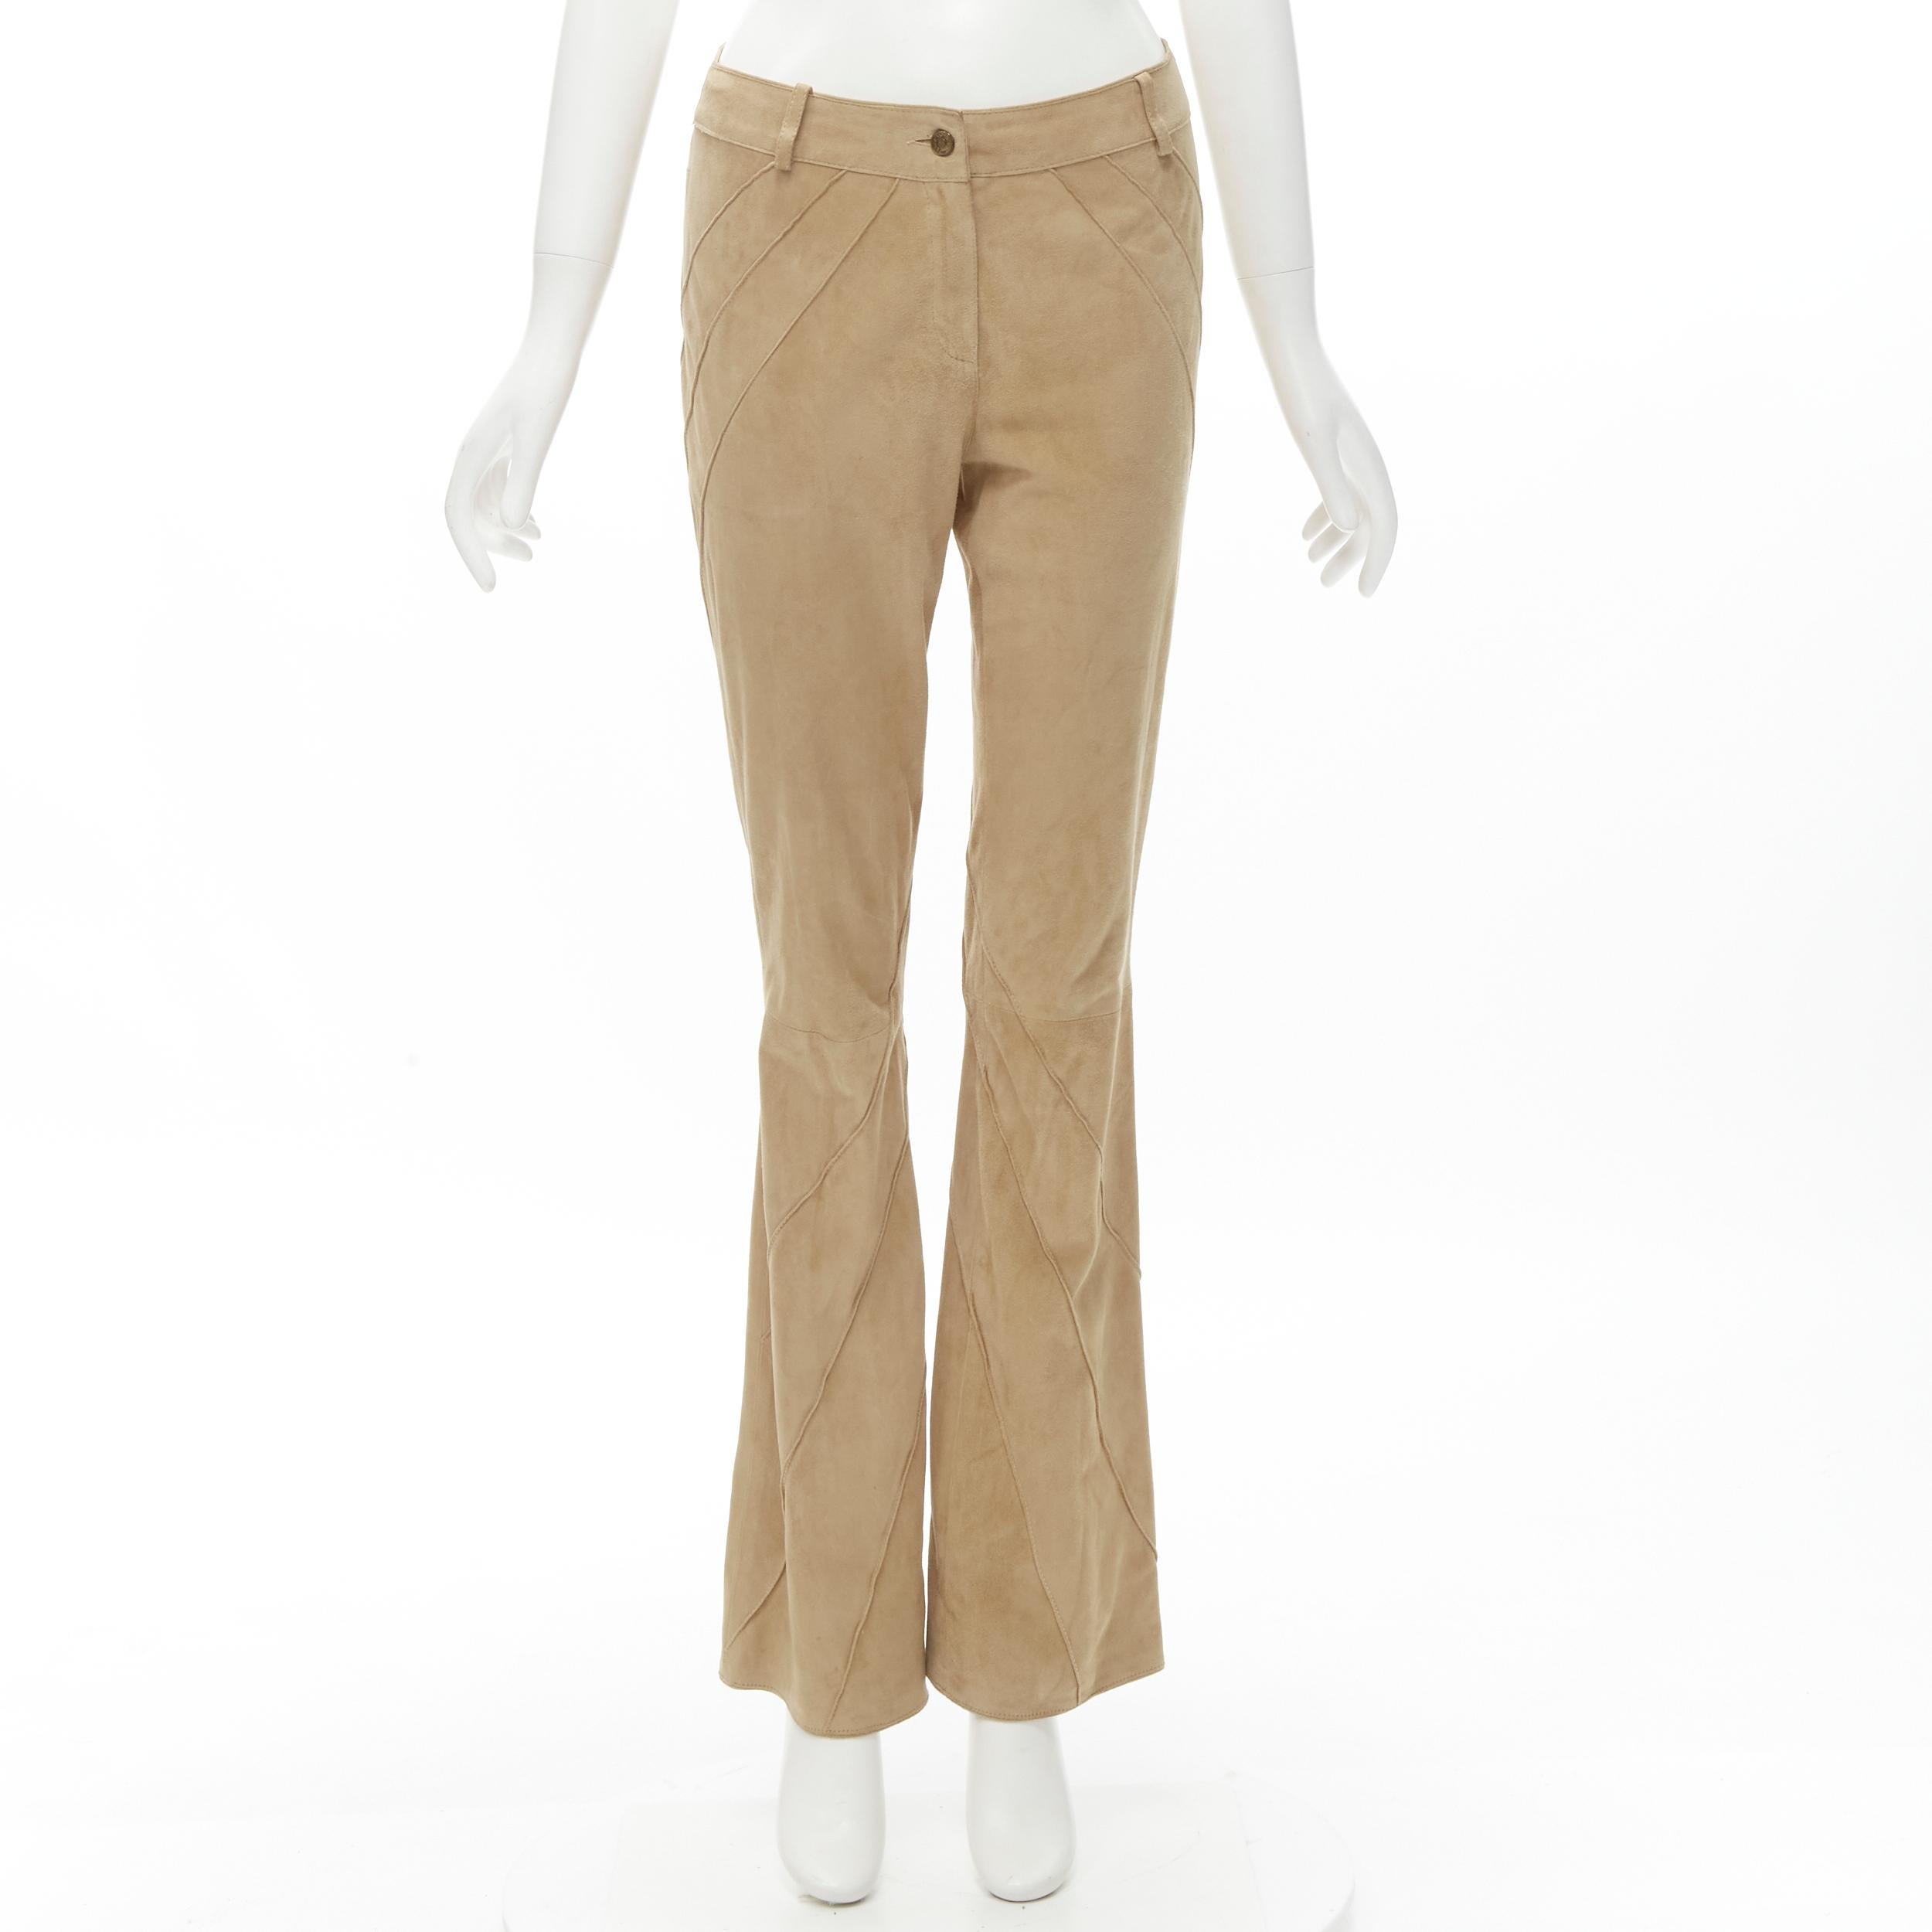 CHRISTIAN DIOR Galliano Vintage brown suede spiral dart flared pants FR36 S 6